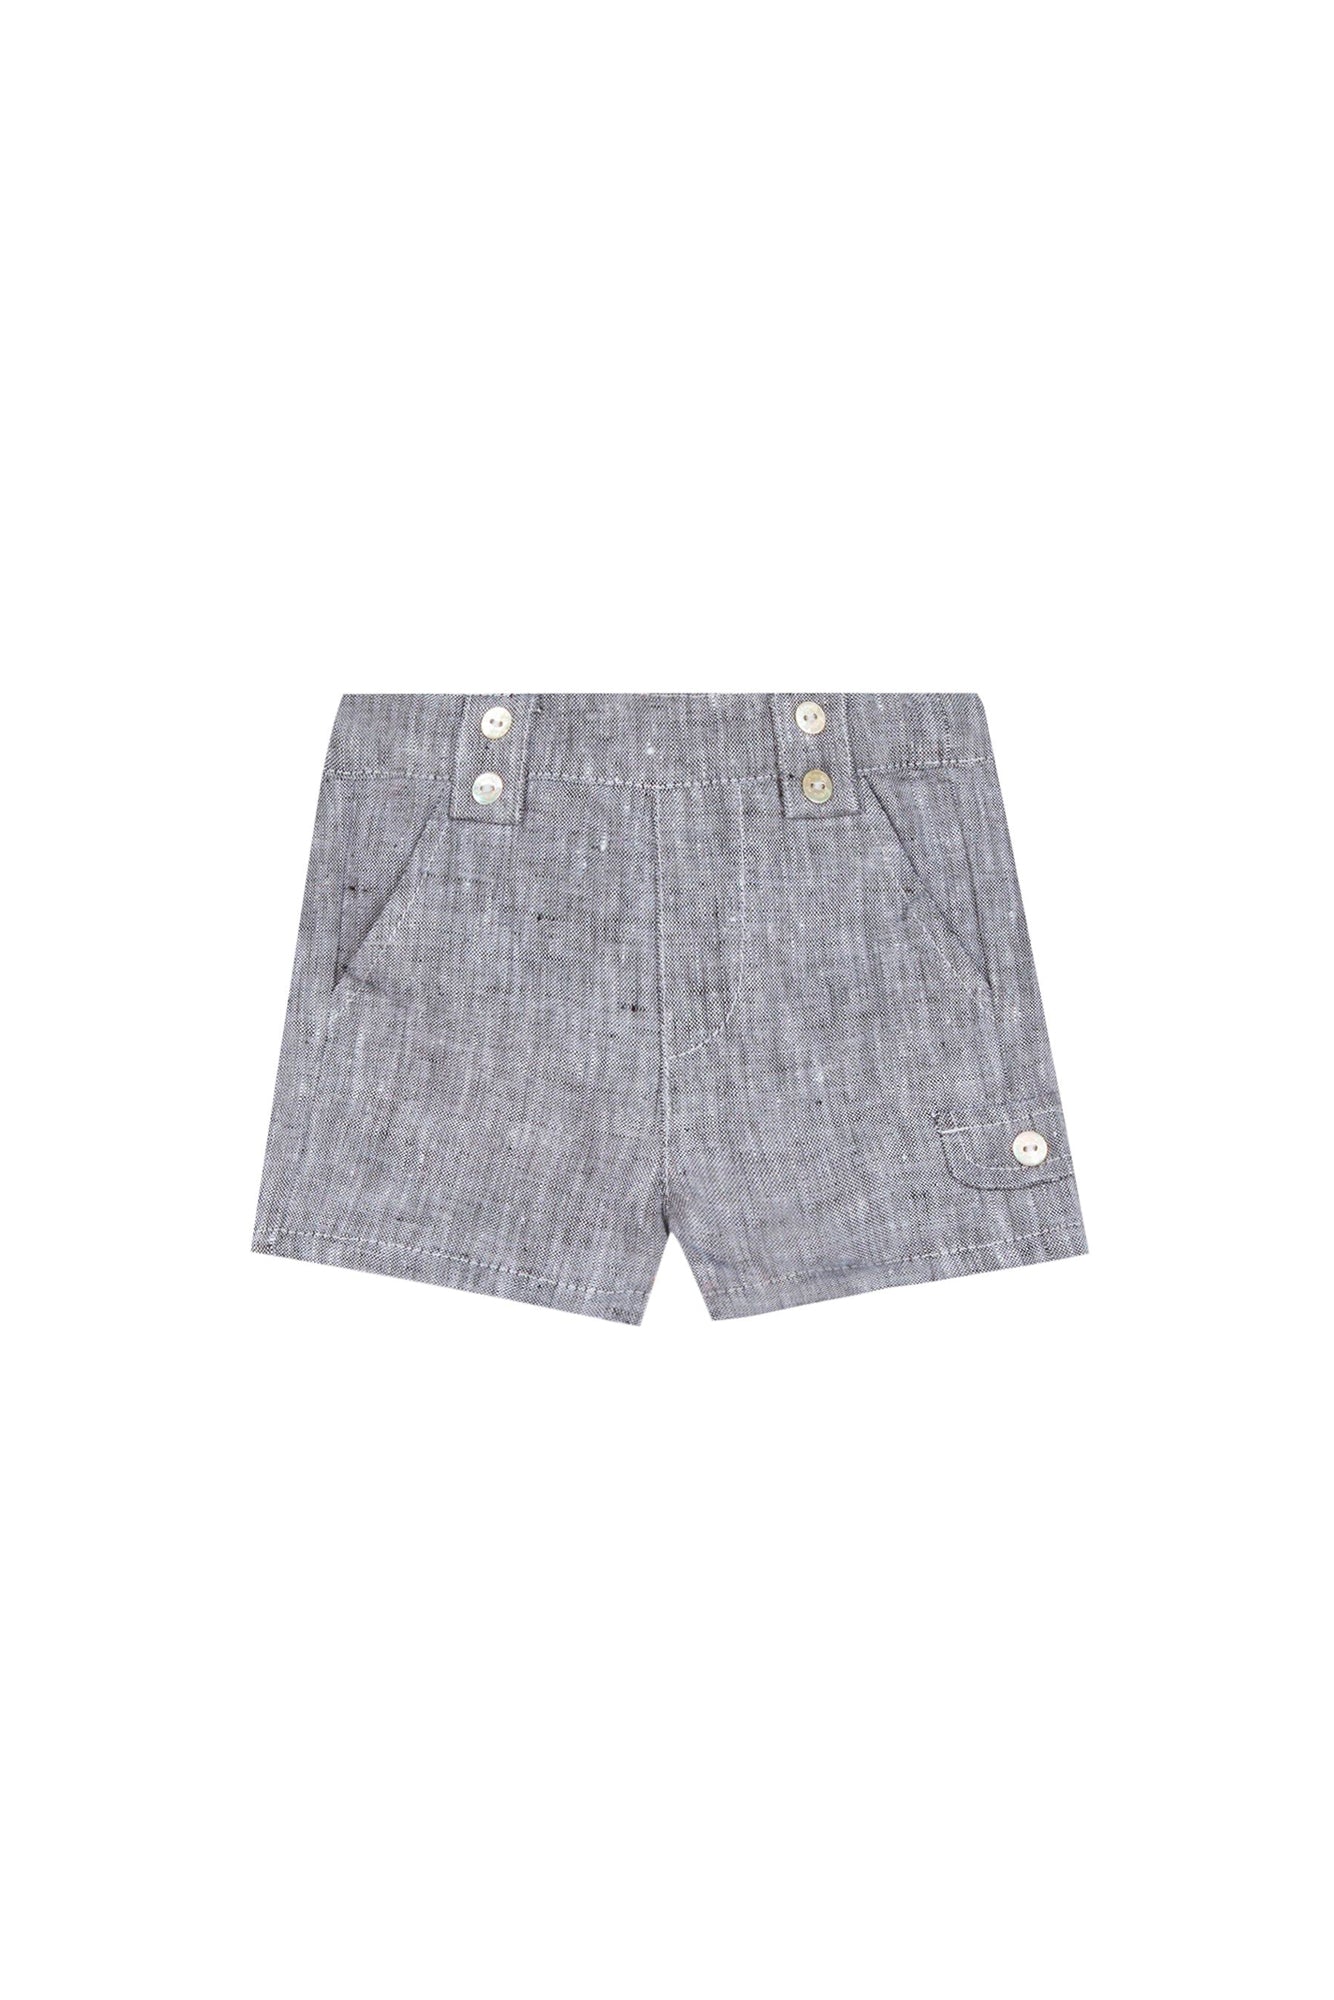 Anthracite Chiné Baby Cabane Perchee Short